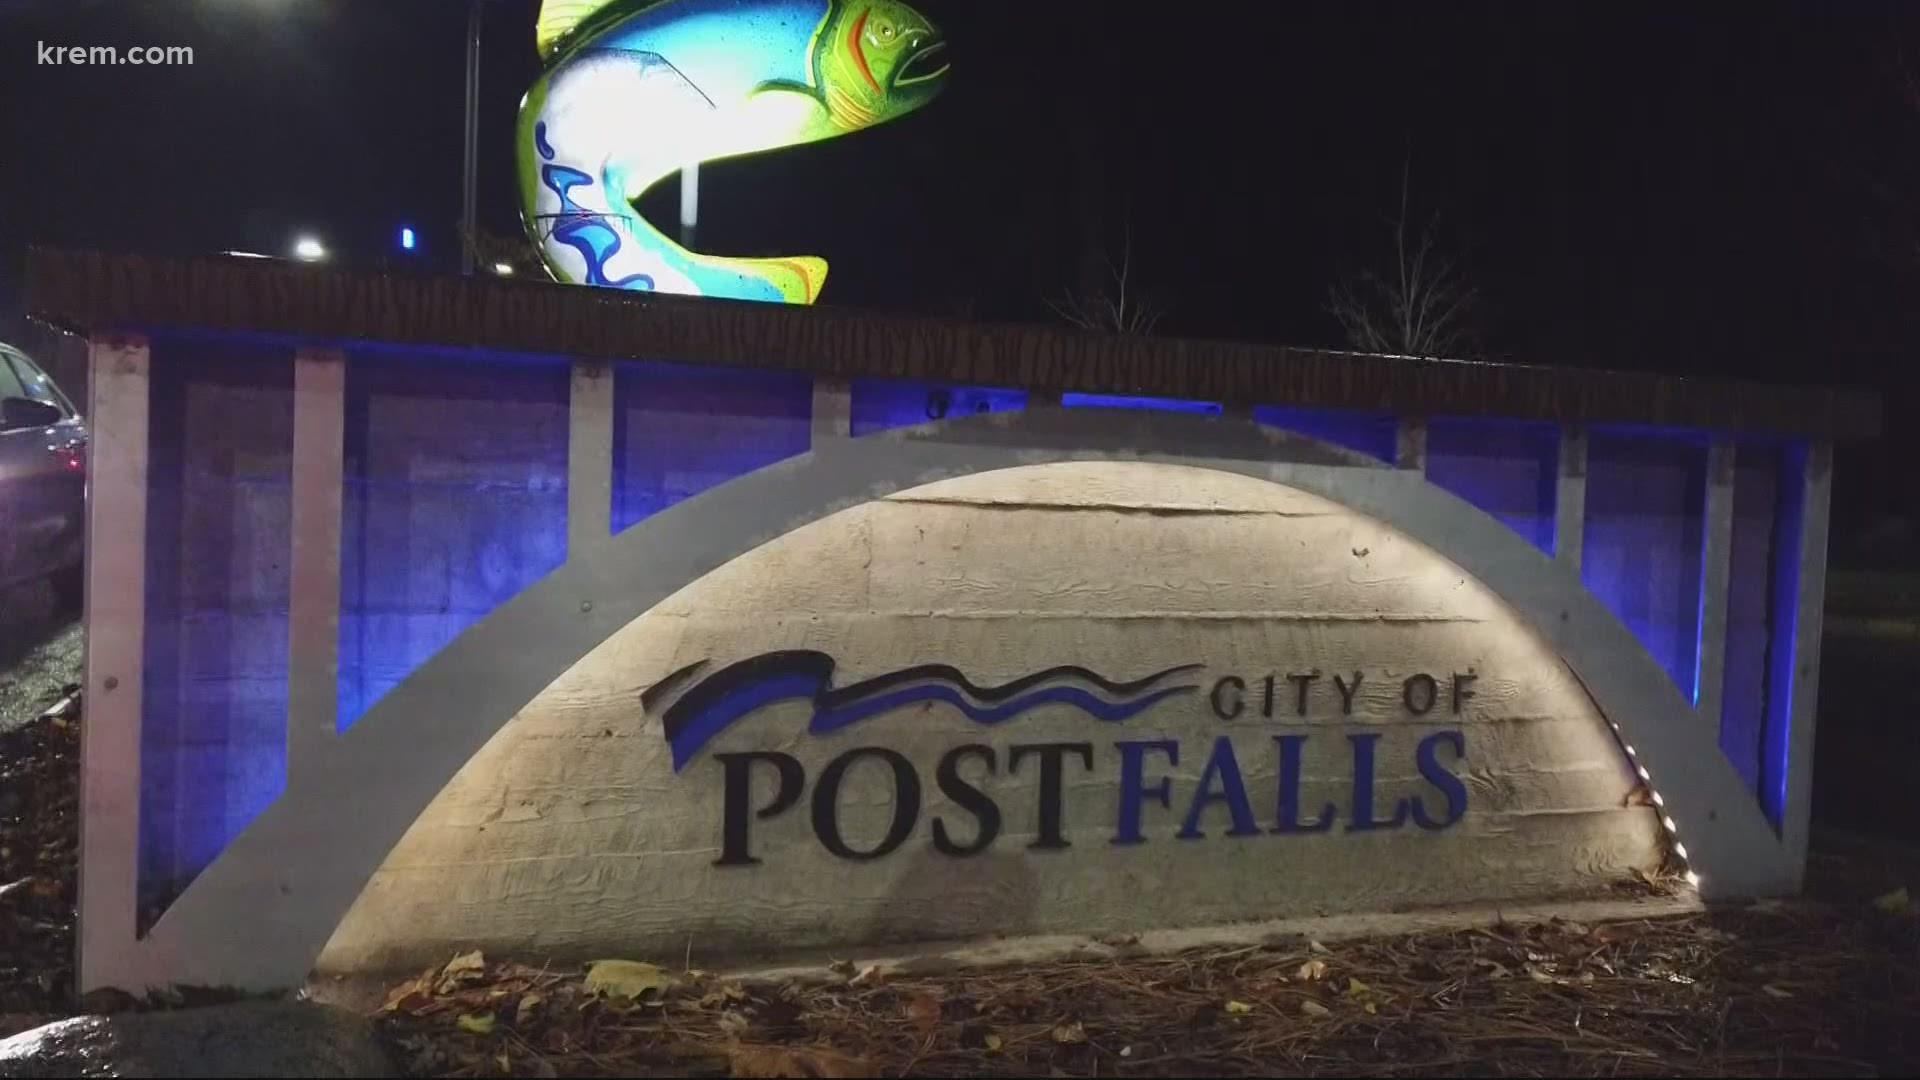 Anyone who violates the new order on city property in Post Falls will be asked to mask up or leave.